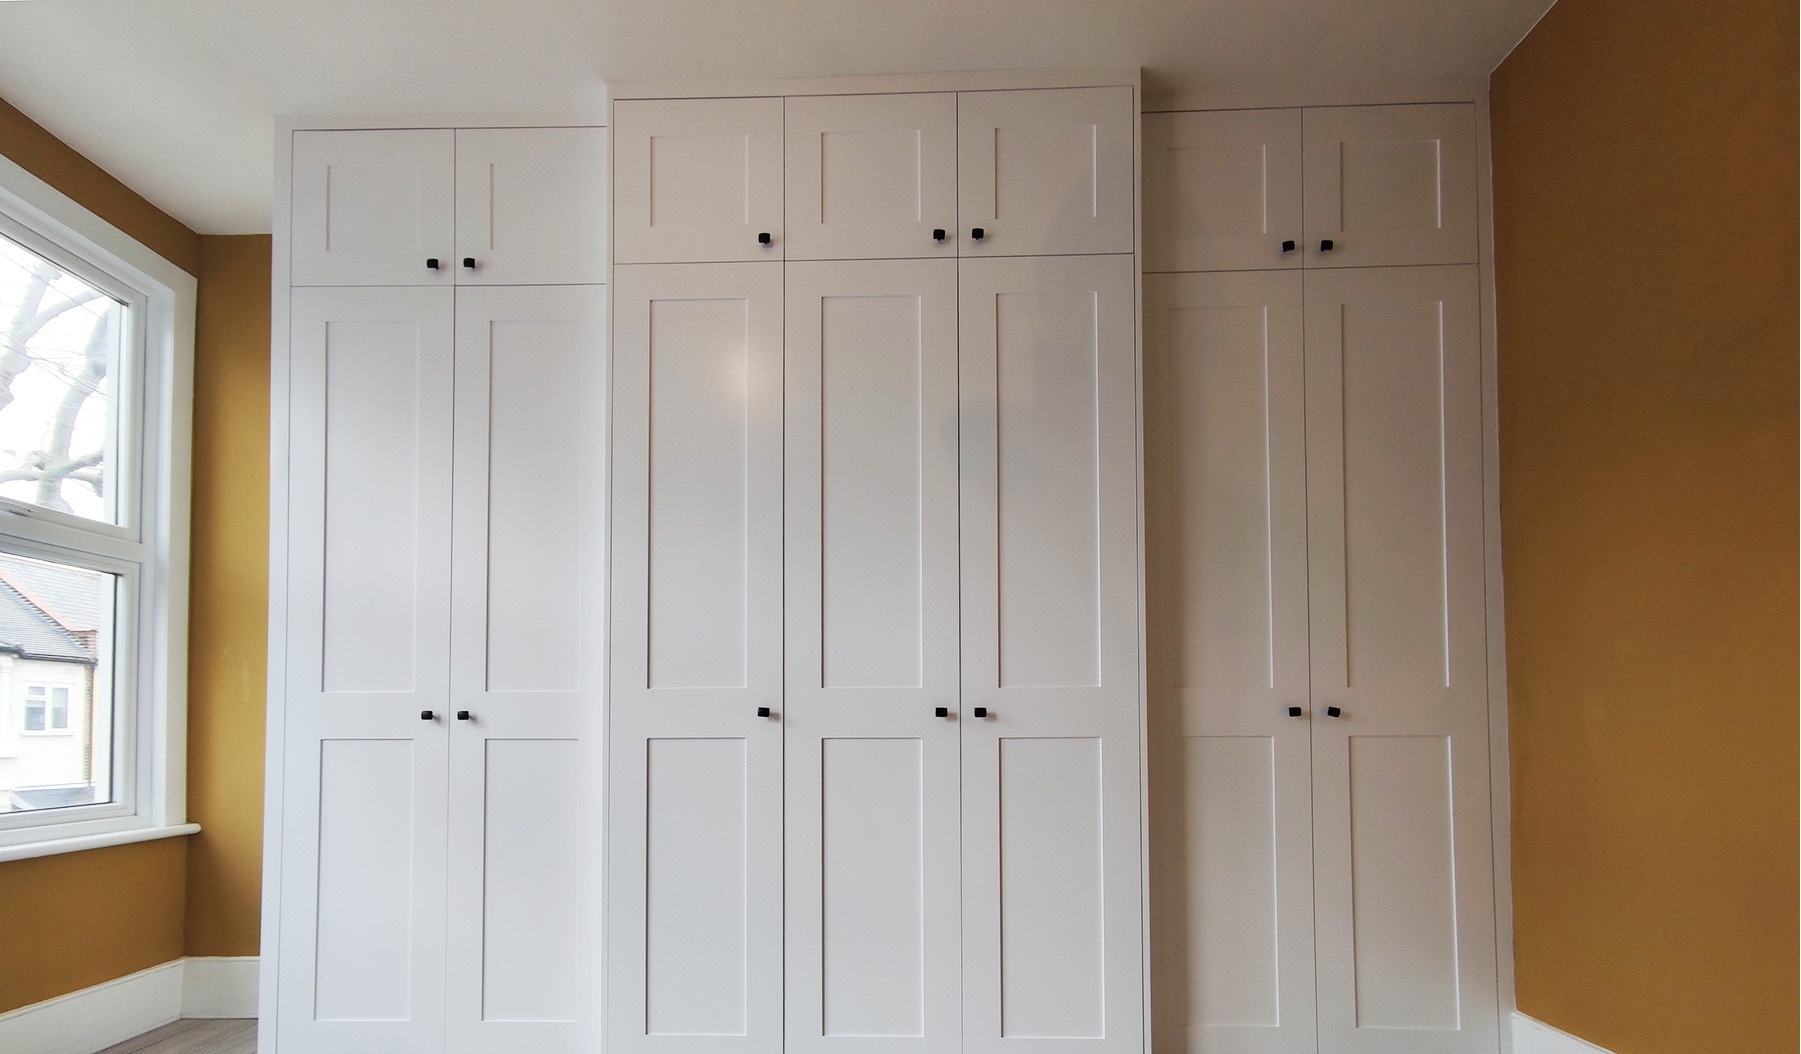 How Much Does A Built-In Wardrobe Cost